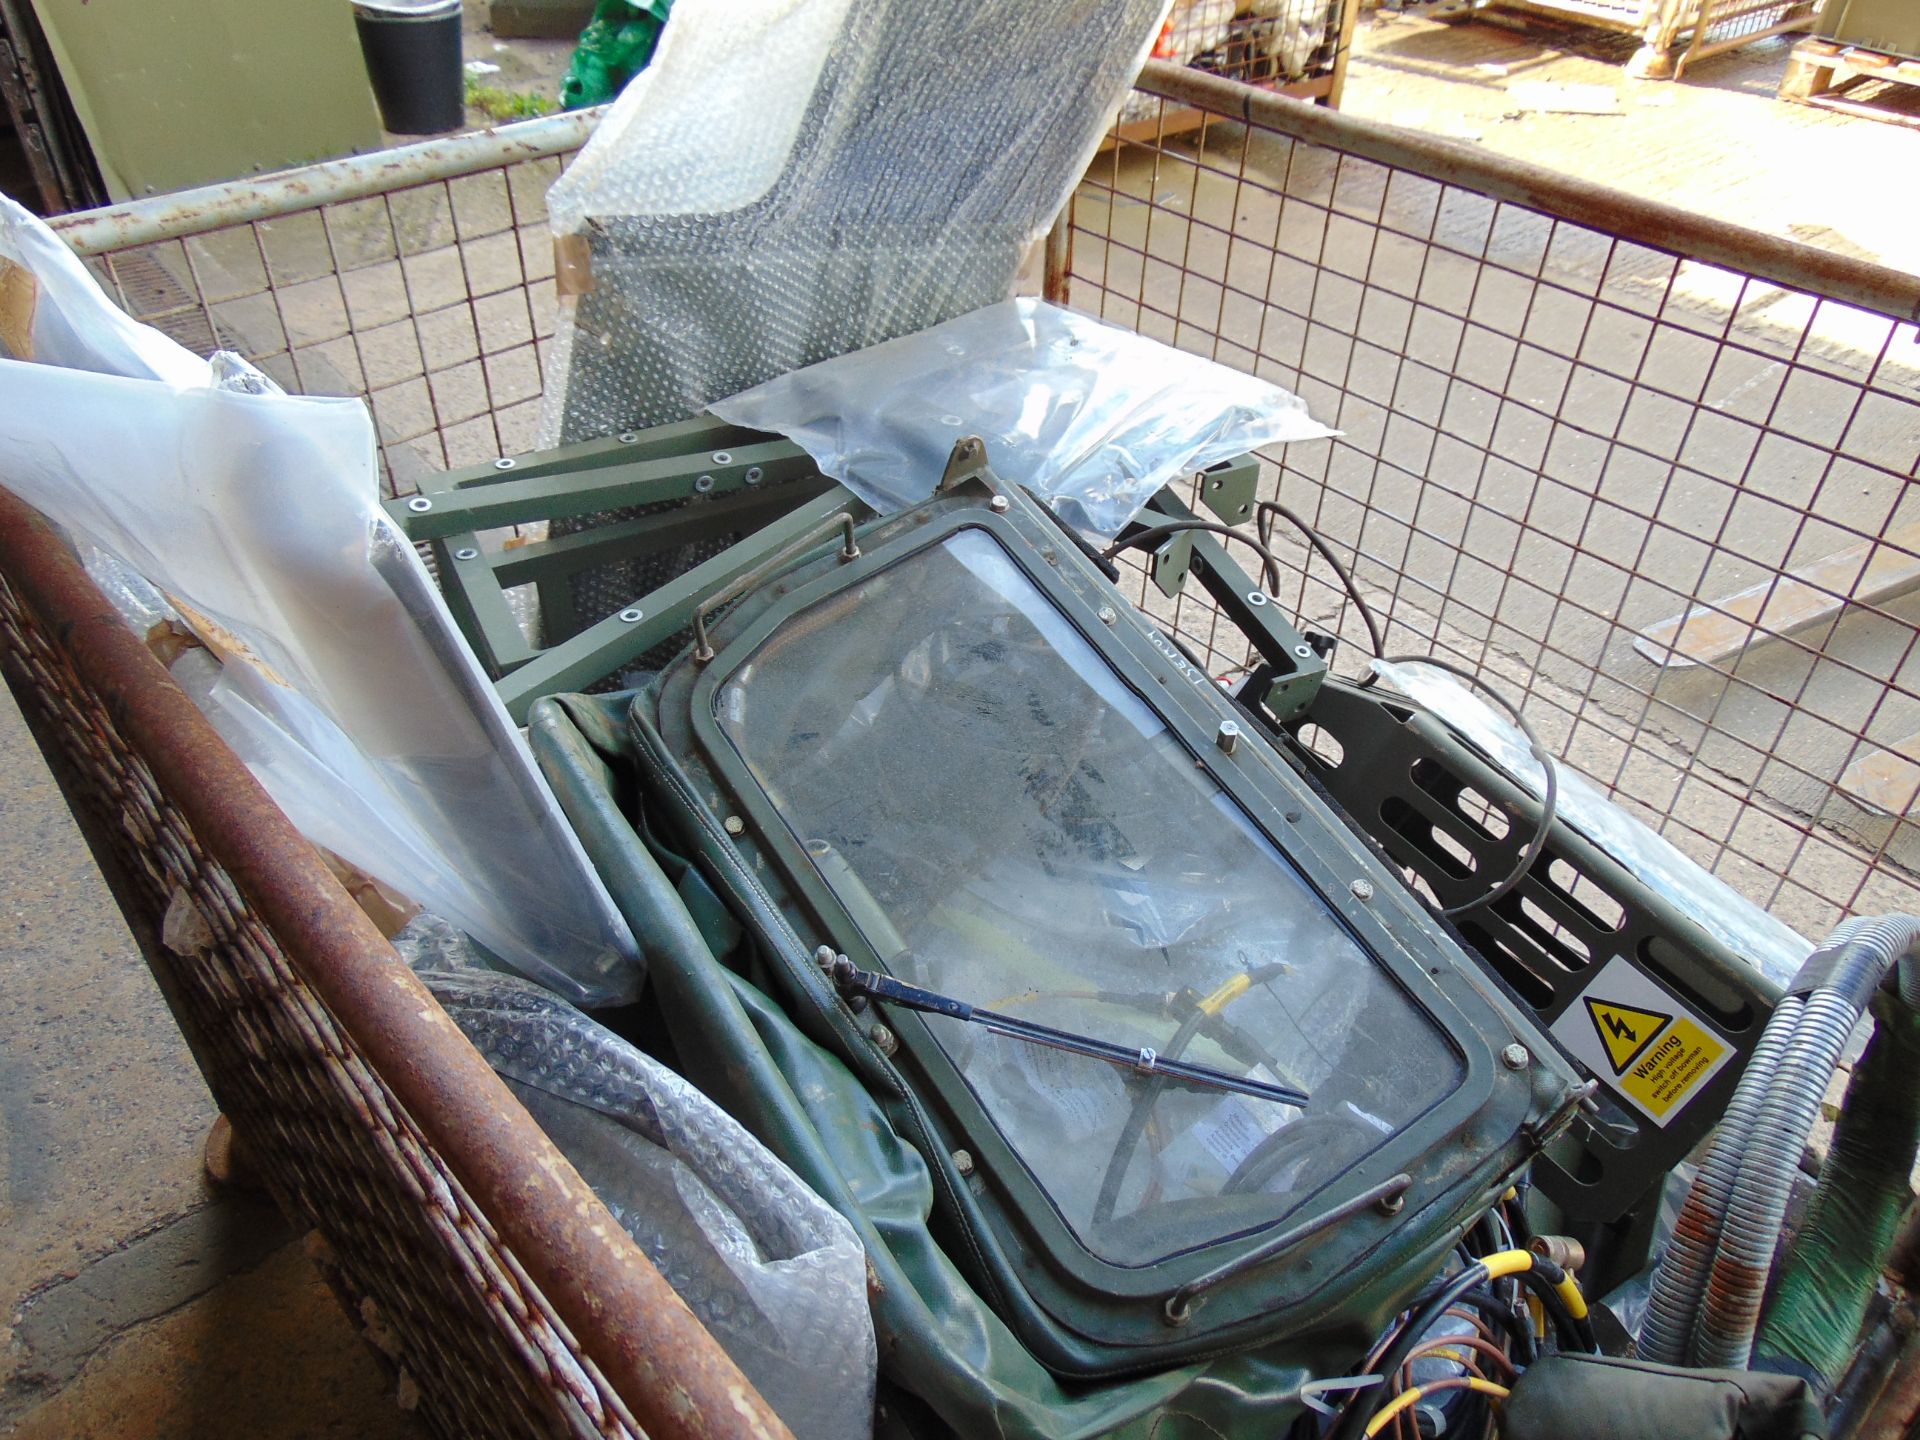 1 x Stillage of Unissued AFV Spares / CES Windscreen, Covers, Cable, Radio Mountings Etc - Image 2 of 5